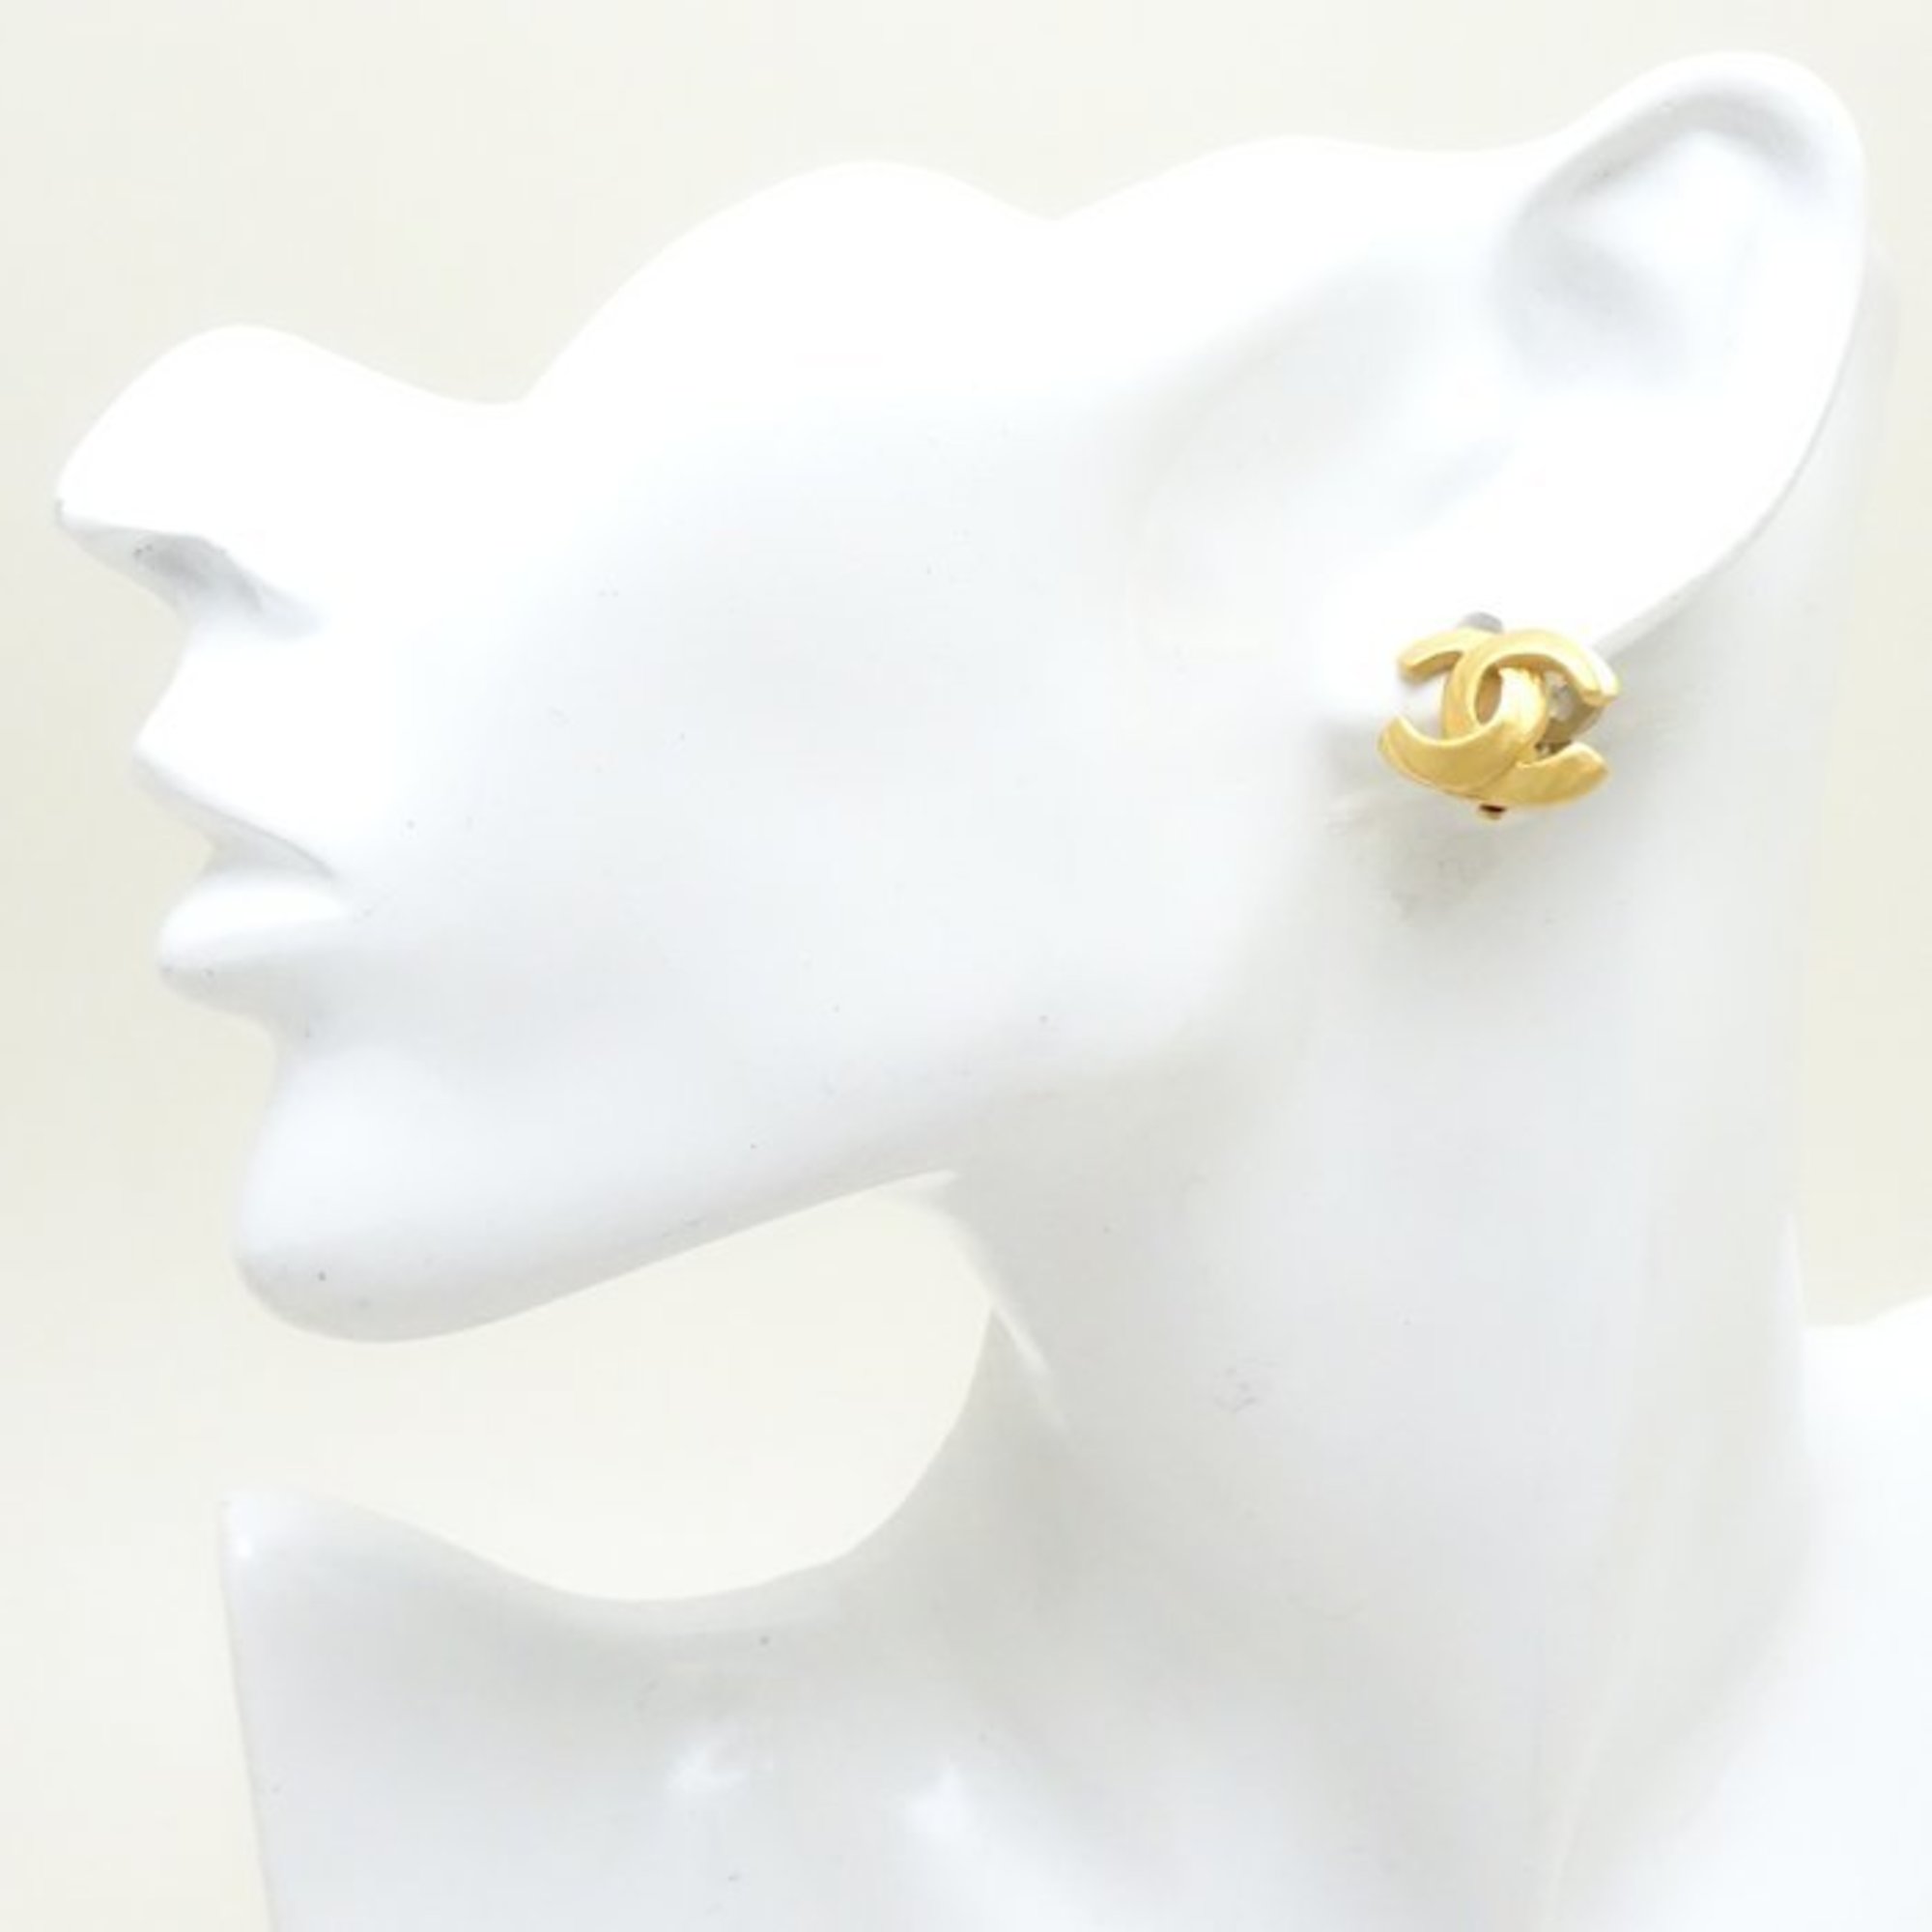 CHANEL Coco Mark Earrings 00T GP Gold Plated 291845